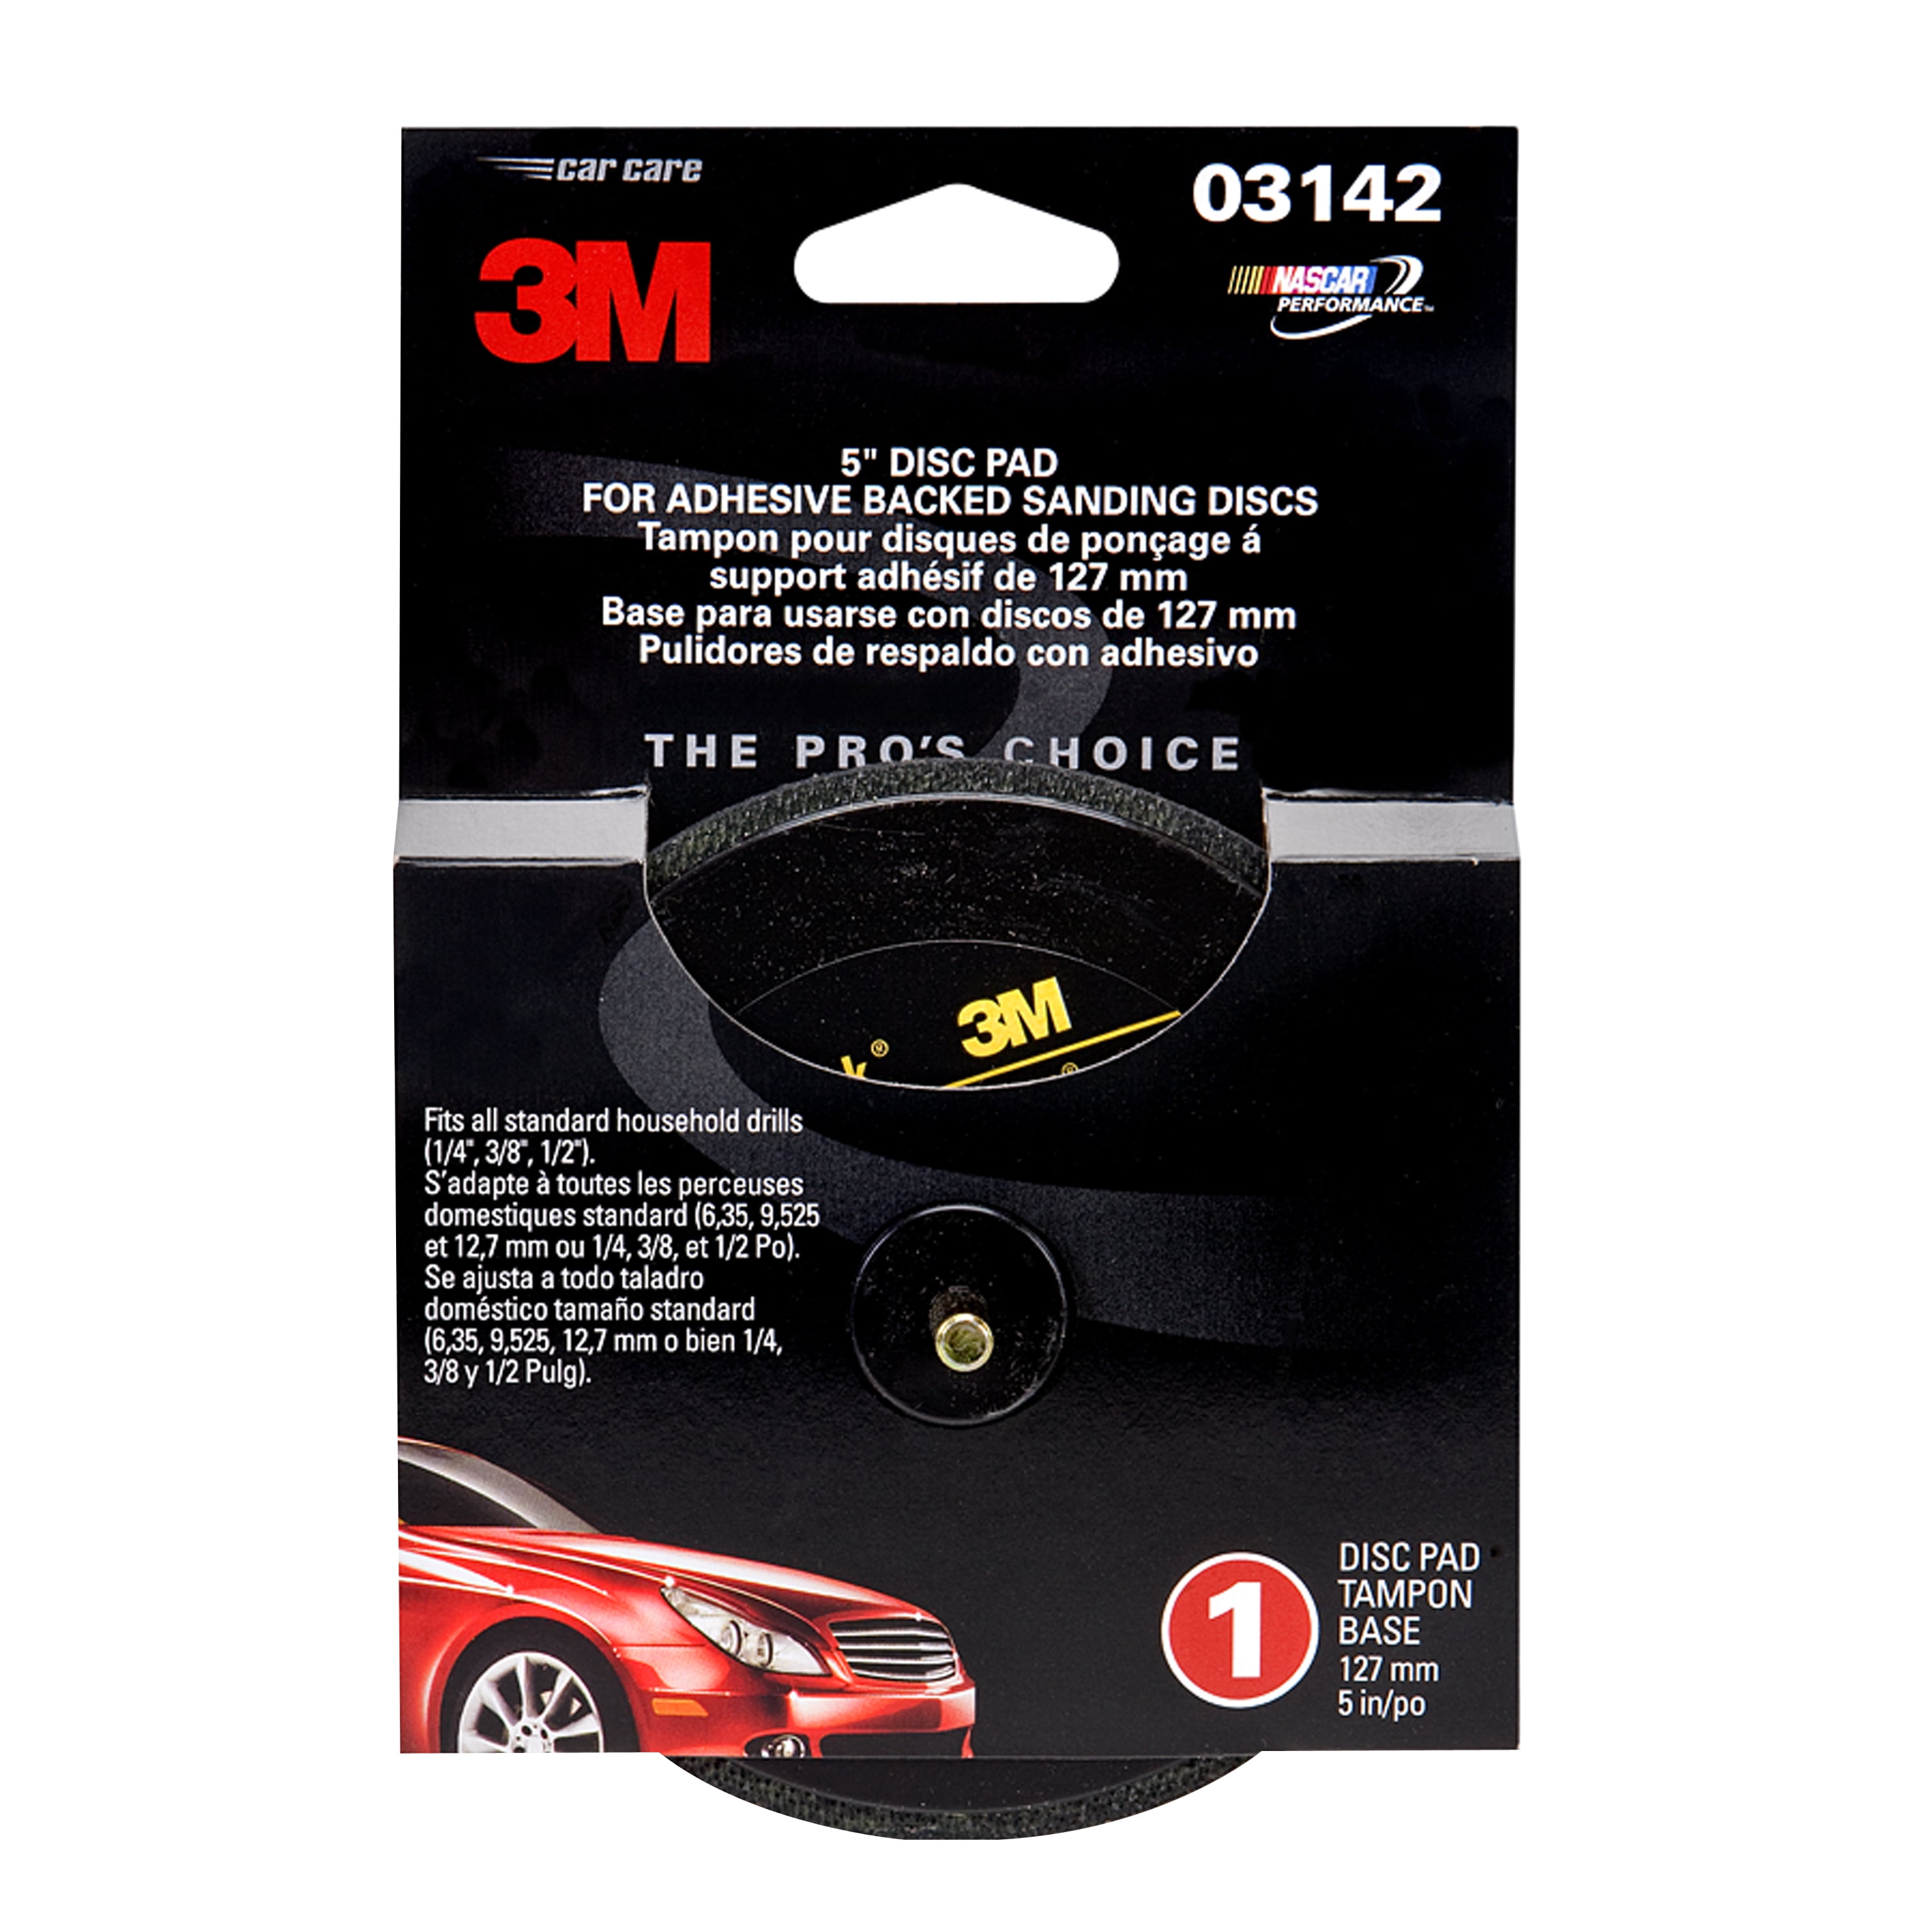 NEW 3M 03142 5" DISC PAD FOR ADHESIVE BACKED SANDING DISCS FITS STANDARD DRILL 